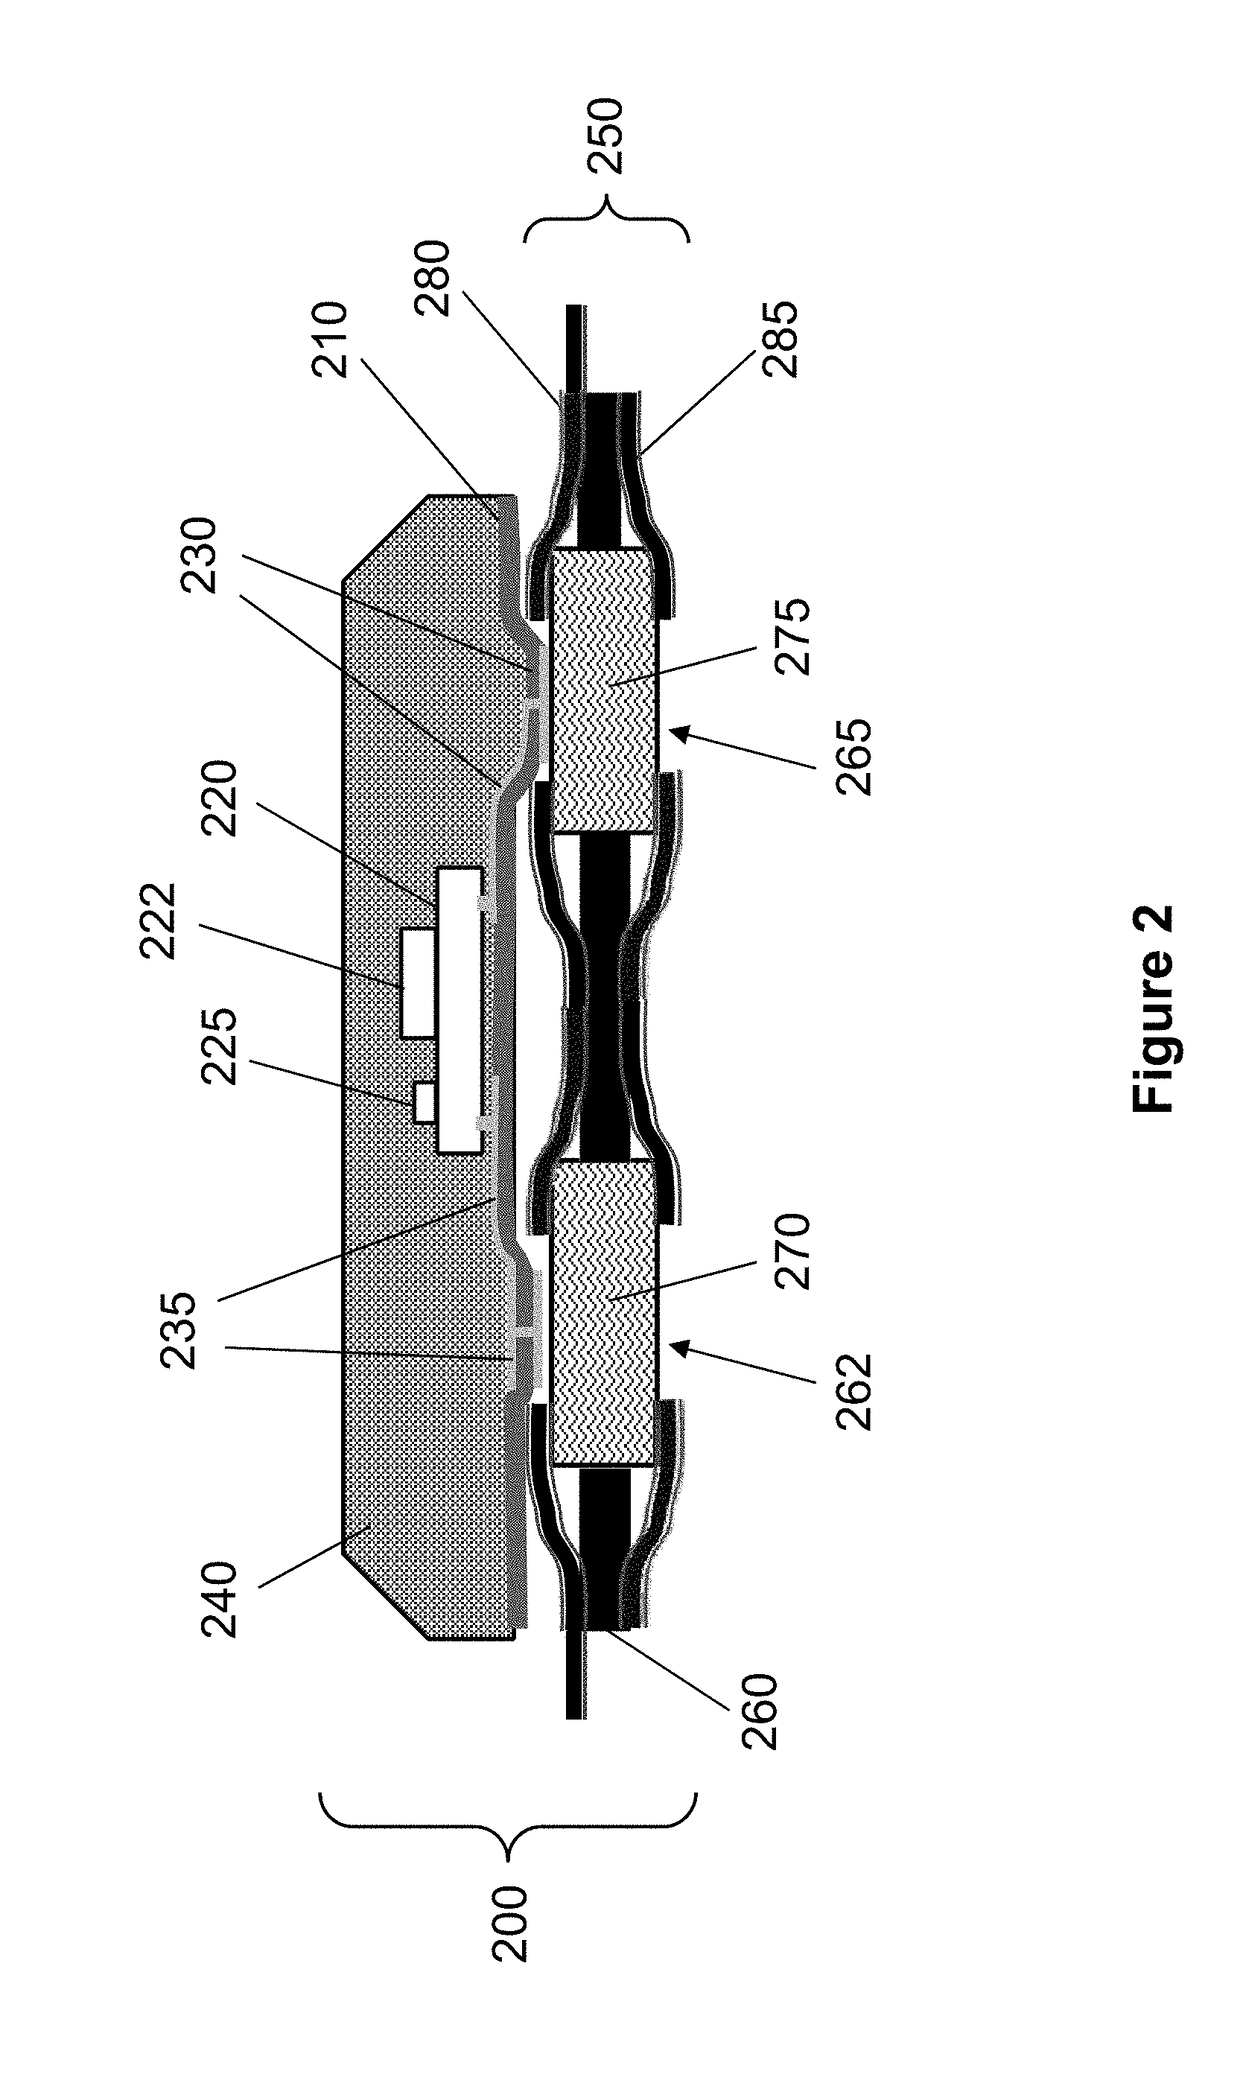 Wearable patch having reliable conductive contacts for measuring electrical signals